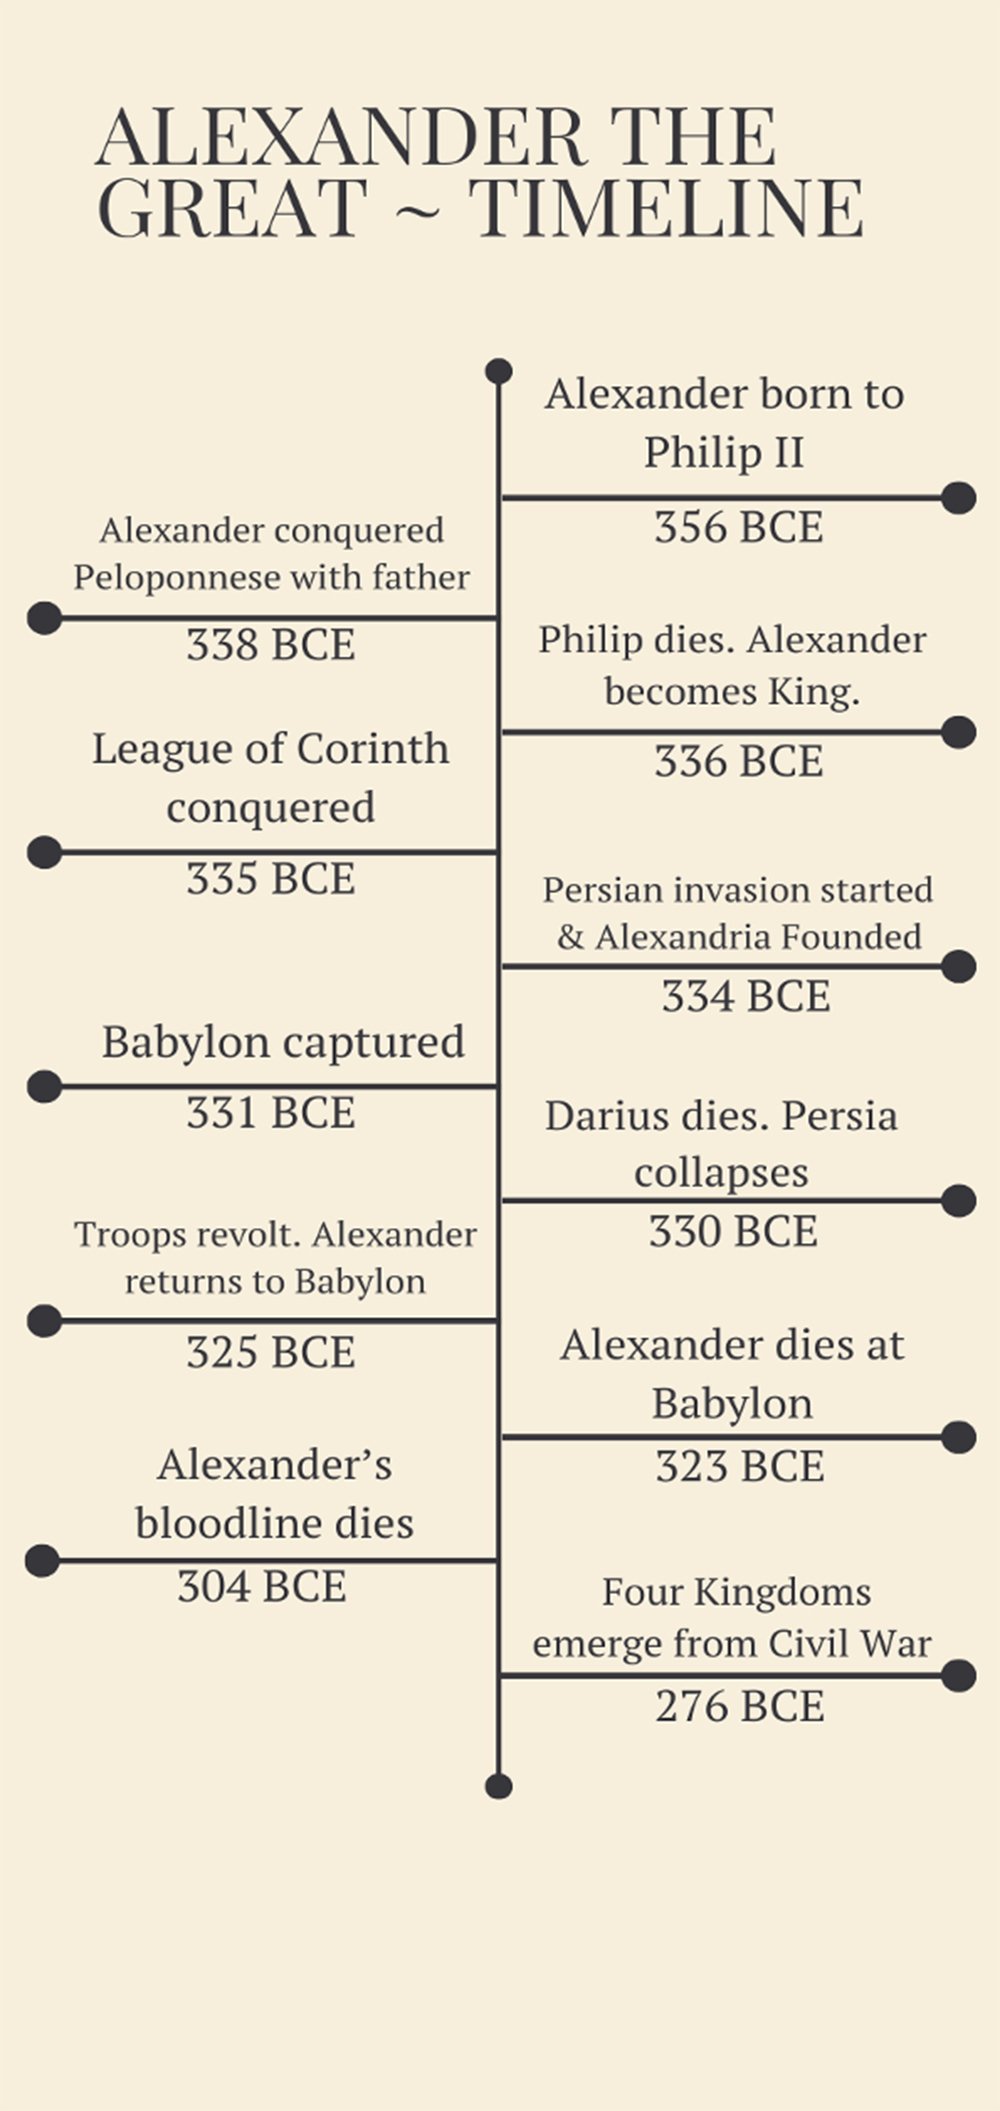 Vertical timeline infographic detailing significant events in the life of Alexander the Great and the subsequent aftermath of his death. Events include his birth in 356 BCE, his ascension to the throne in 336 BCE after Philip II's death, conquests like the League of Corinth in 335 BCE and capturing Babylon in 331 BCE, to his death in 323 BCE, and the eventual end of his bloodline in 304 BCE. The timeline concludes with the emergence of four kingdoms from the ensuing civil war in 276 BCE.